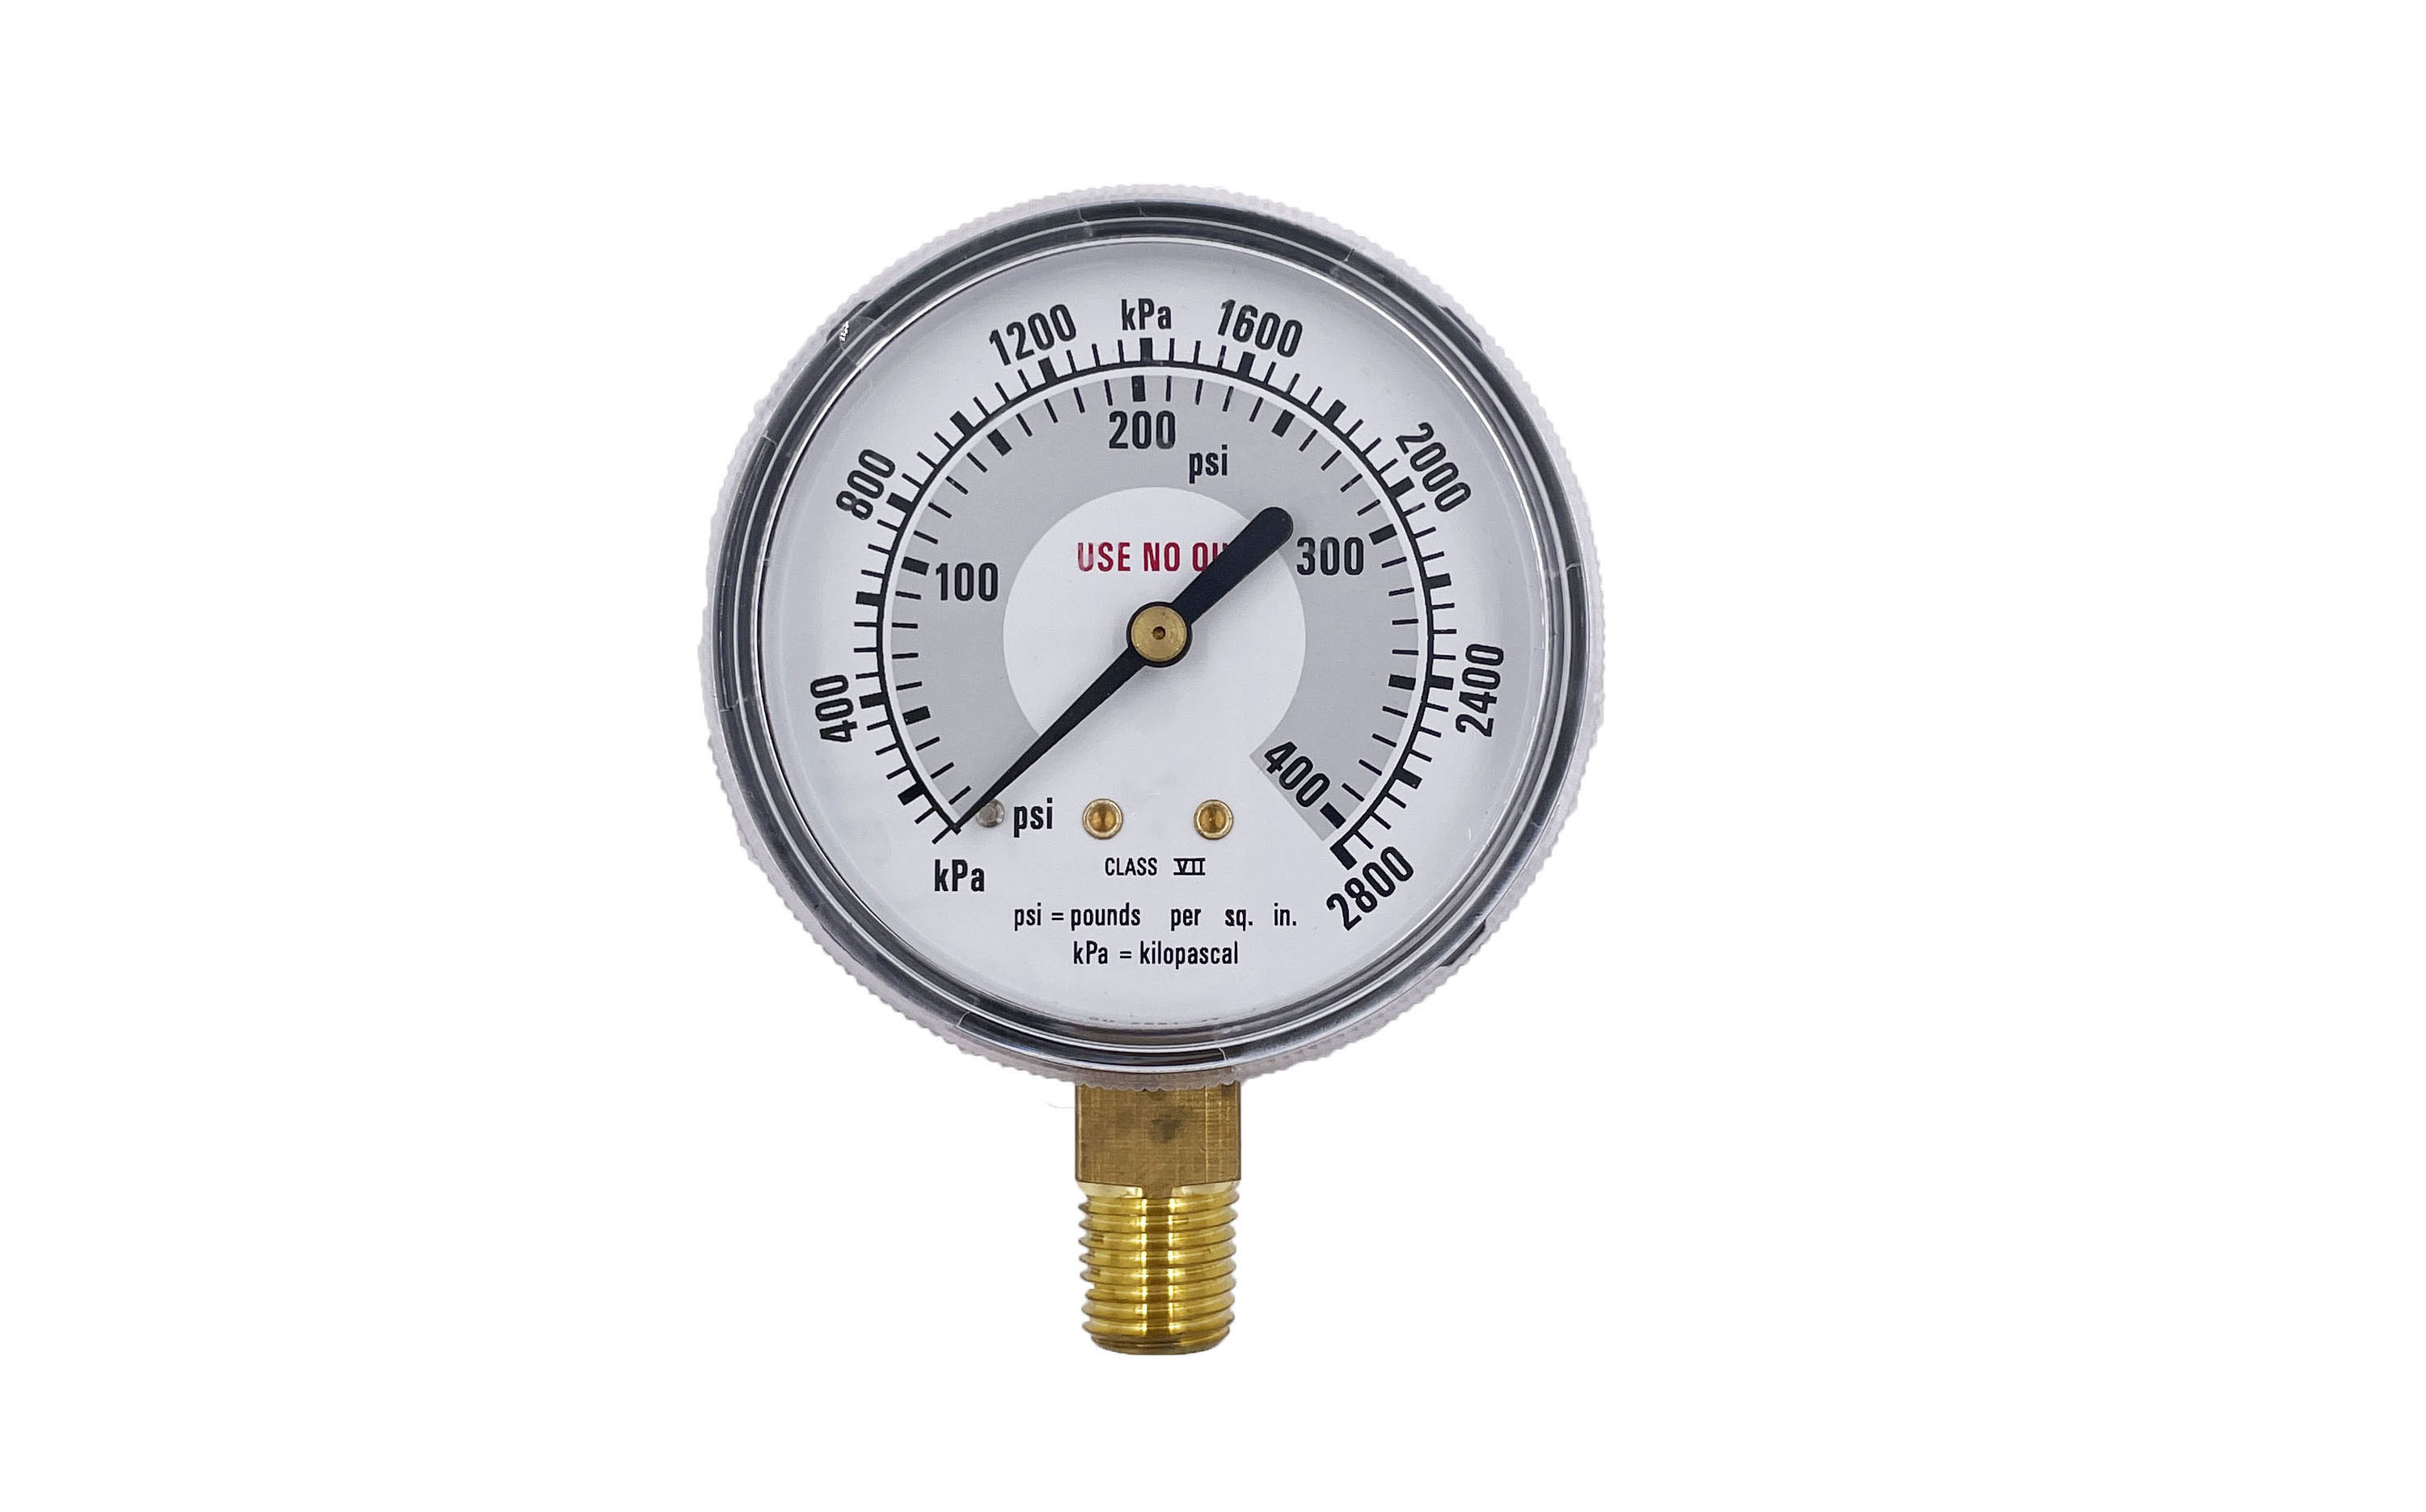 Miami  a company bought a batch of pressure gauges